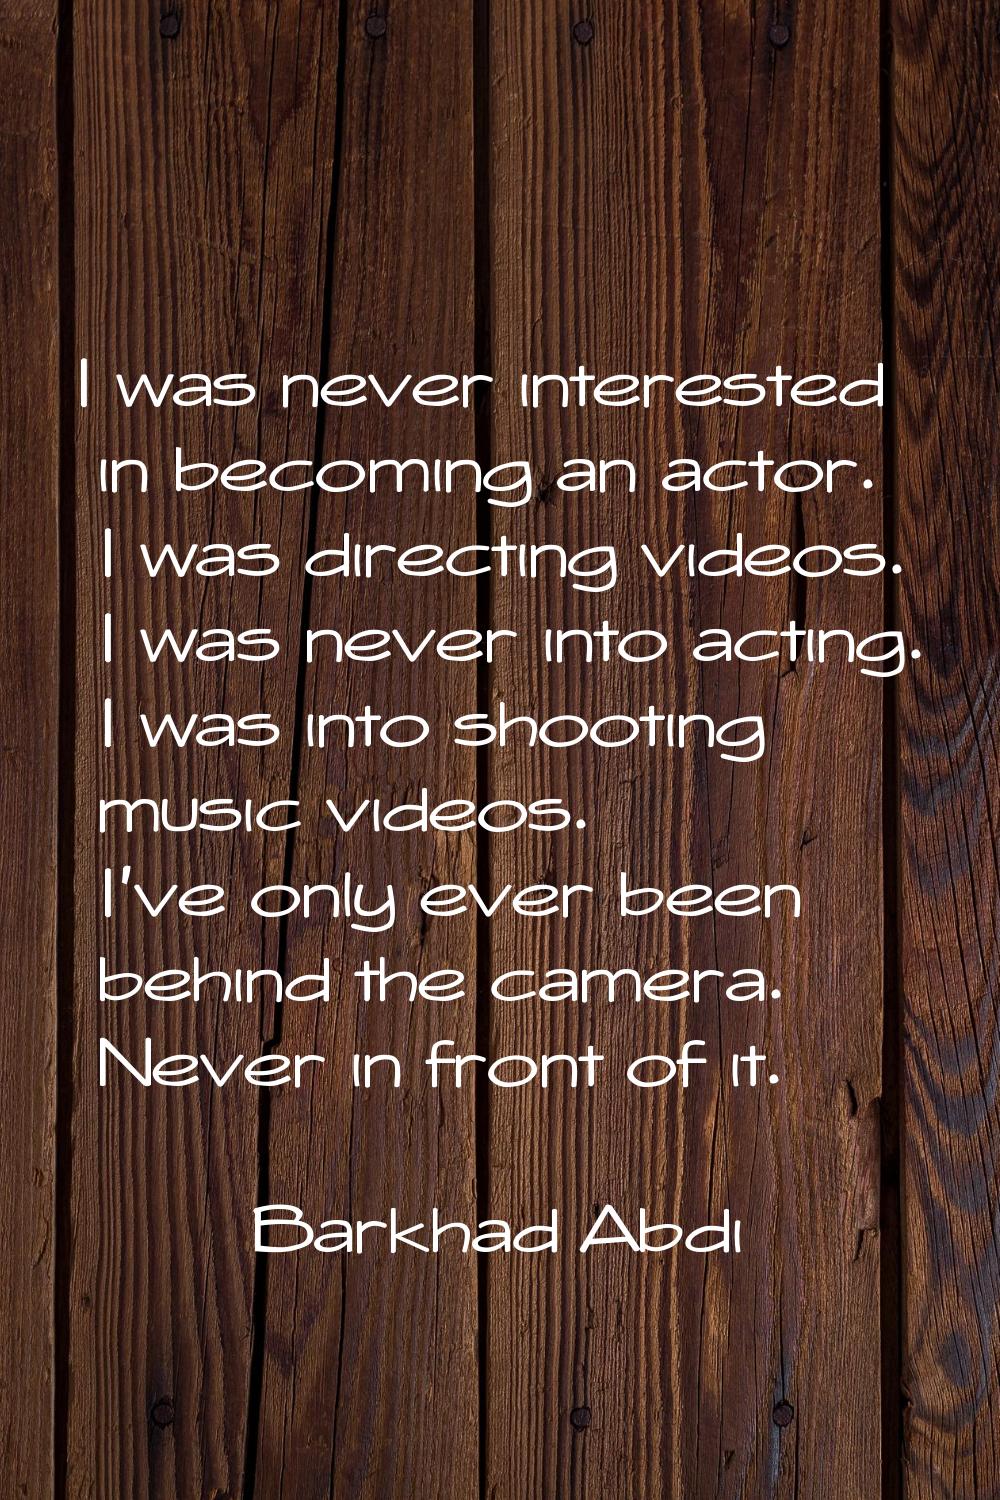 I was never interested in becoming an actor. I was directing videos. I was never into acting. I was